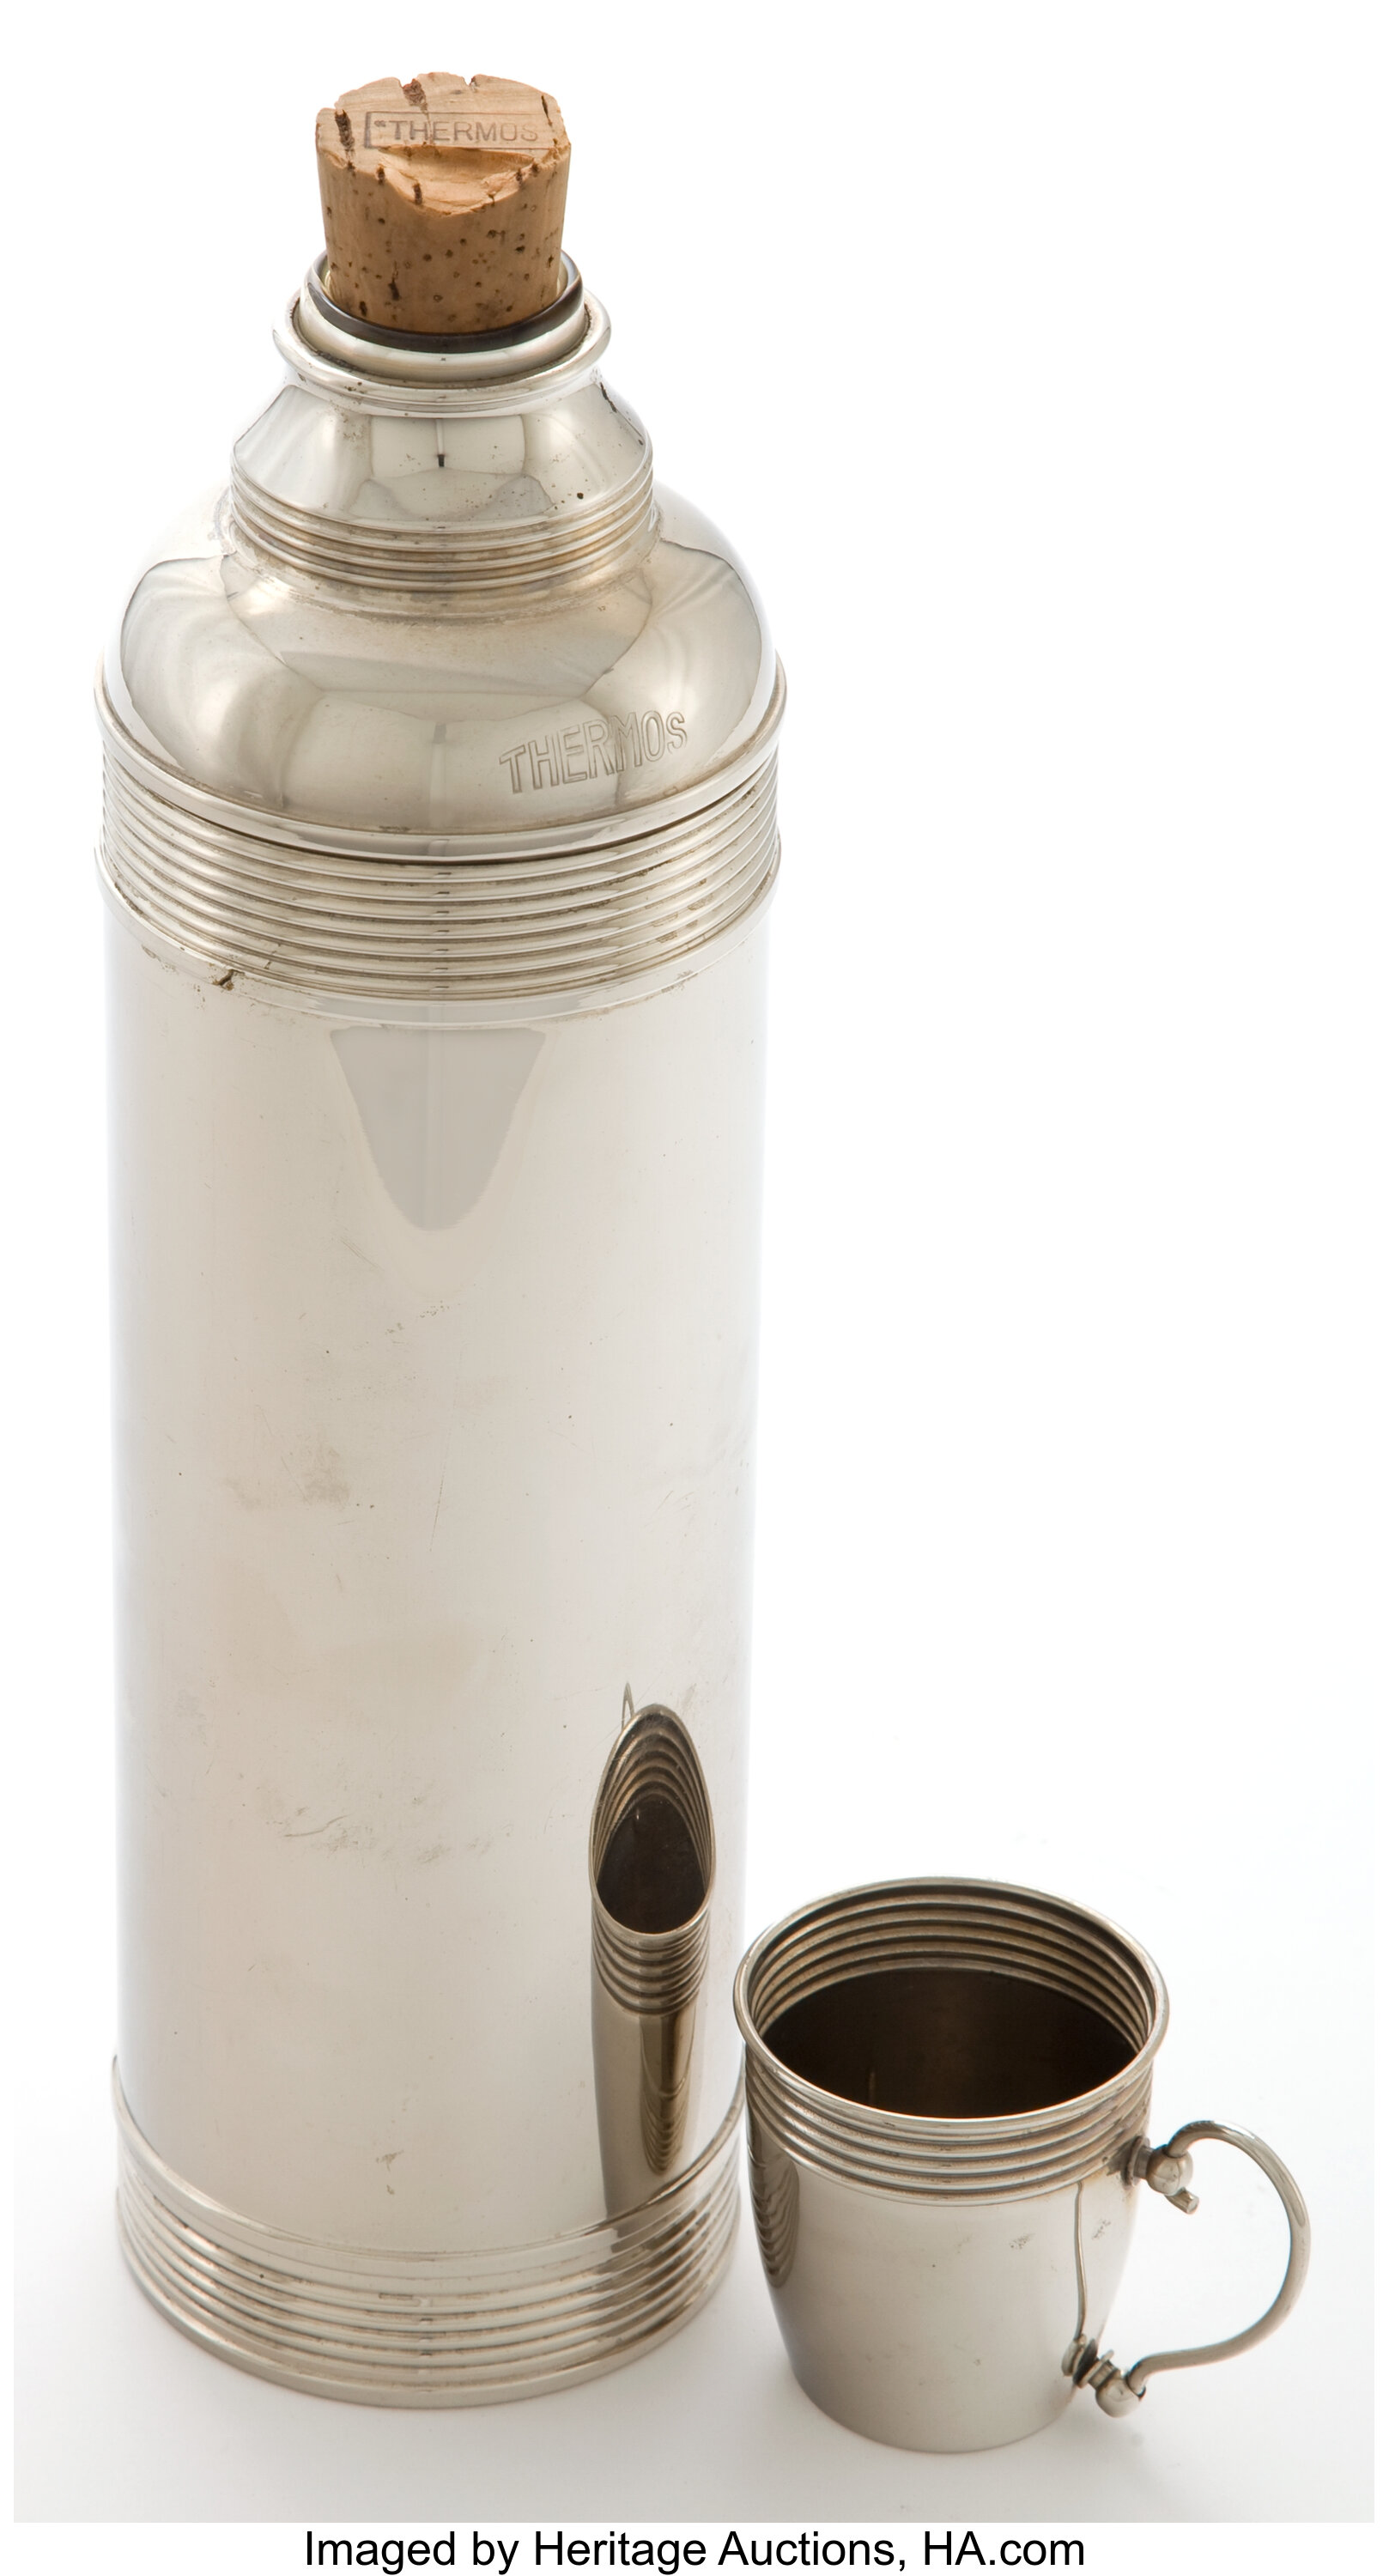 At Auction: American Thermos with United States Lines Etching